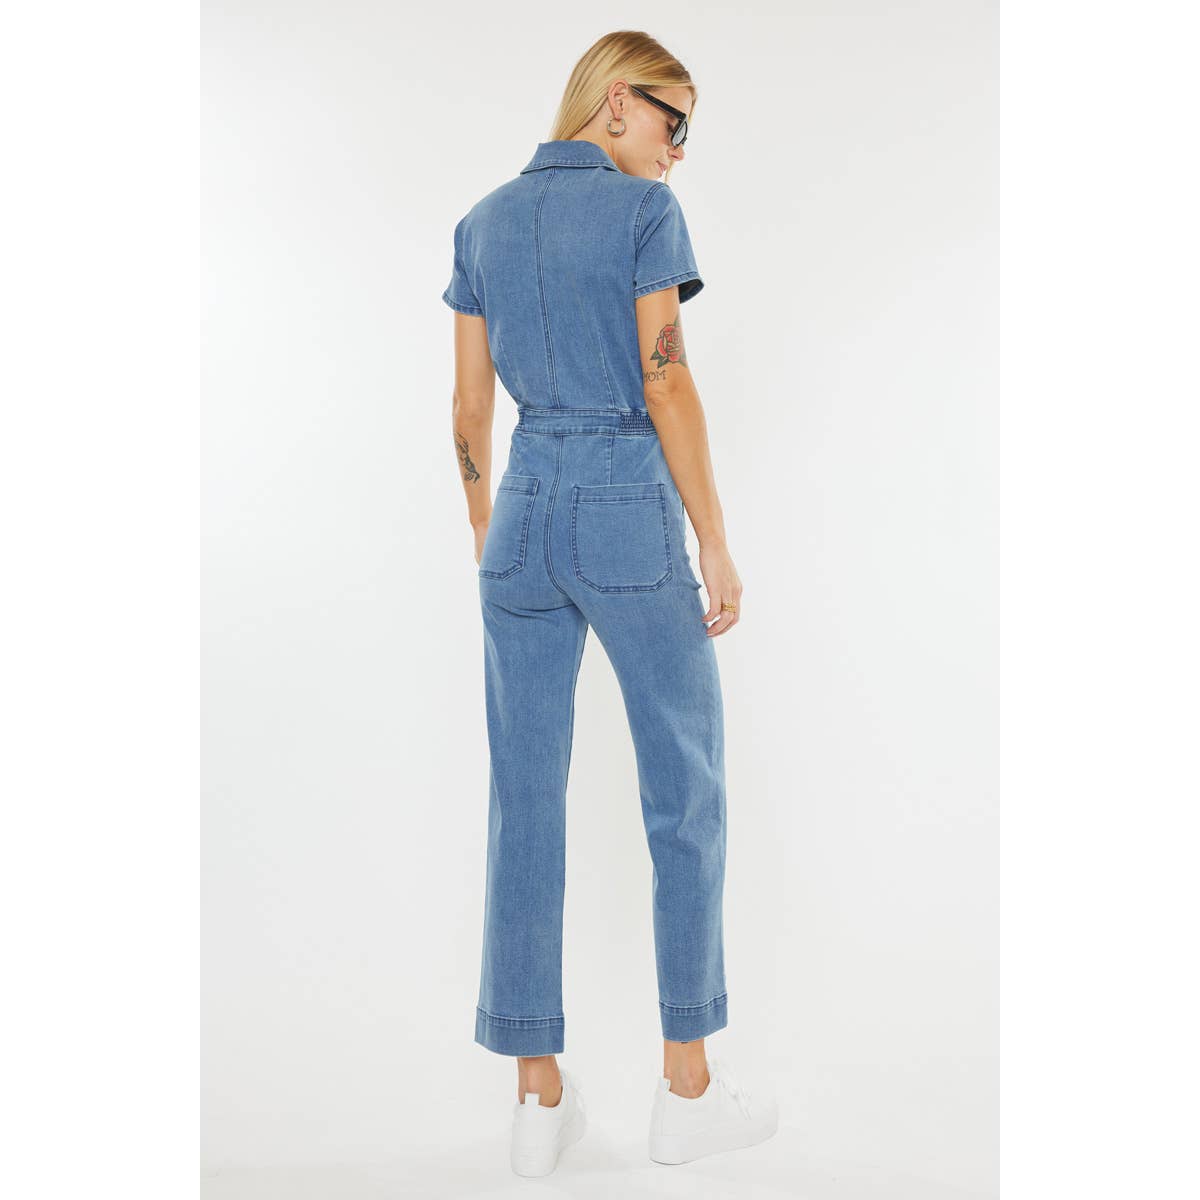 The Roxie Denim Jumpsuit by Kan can